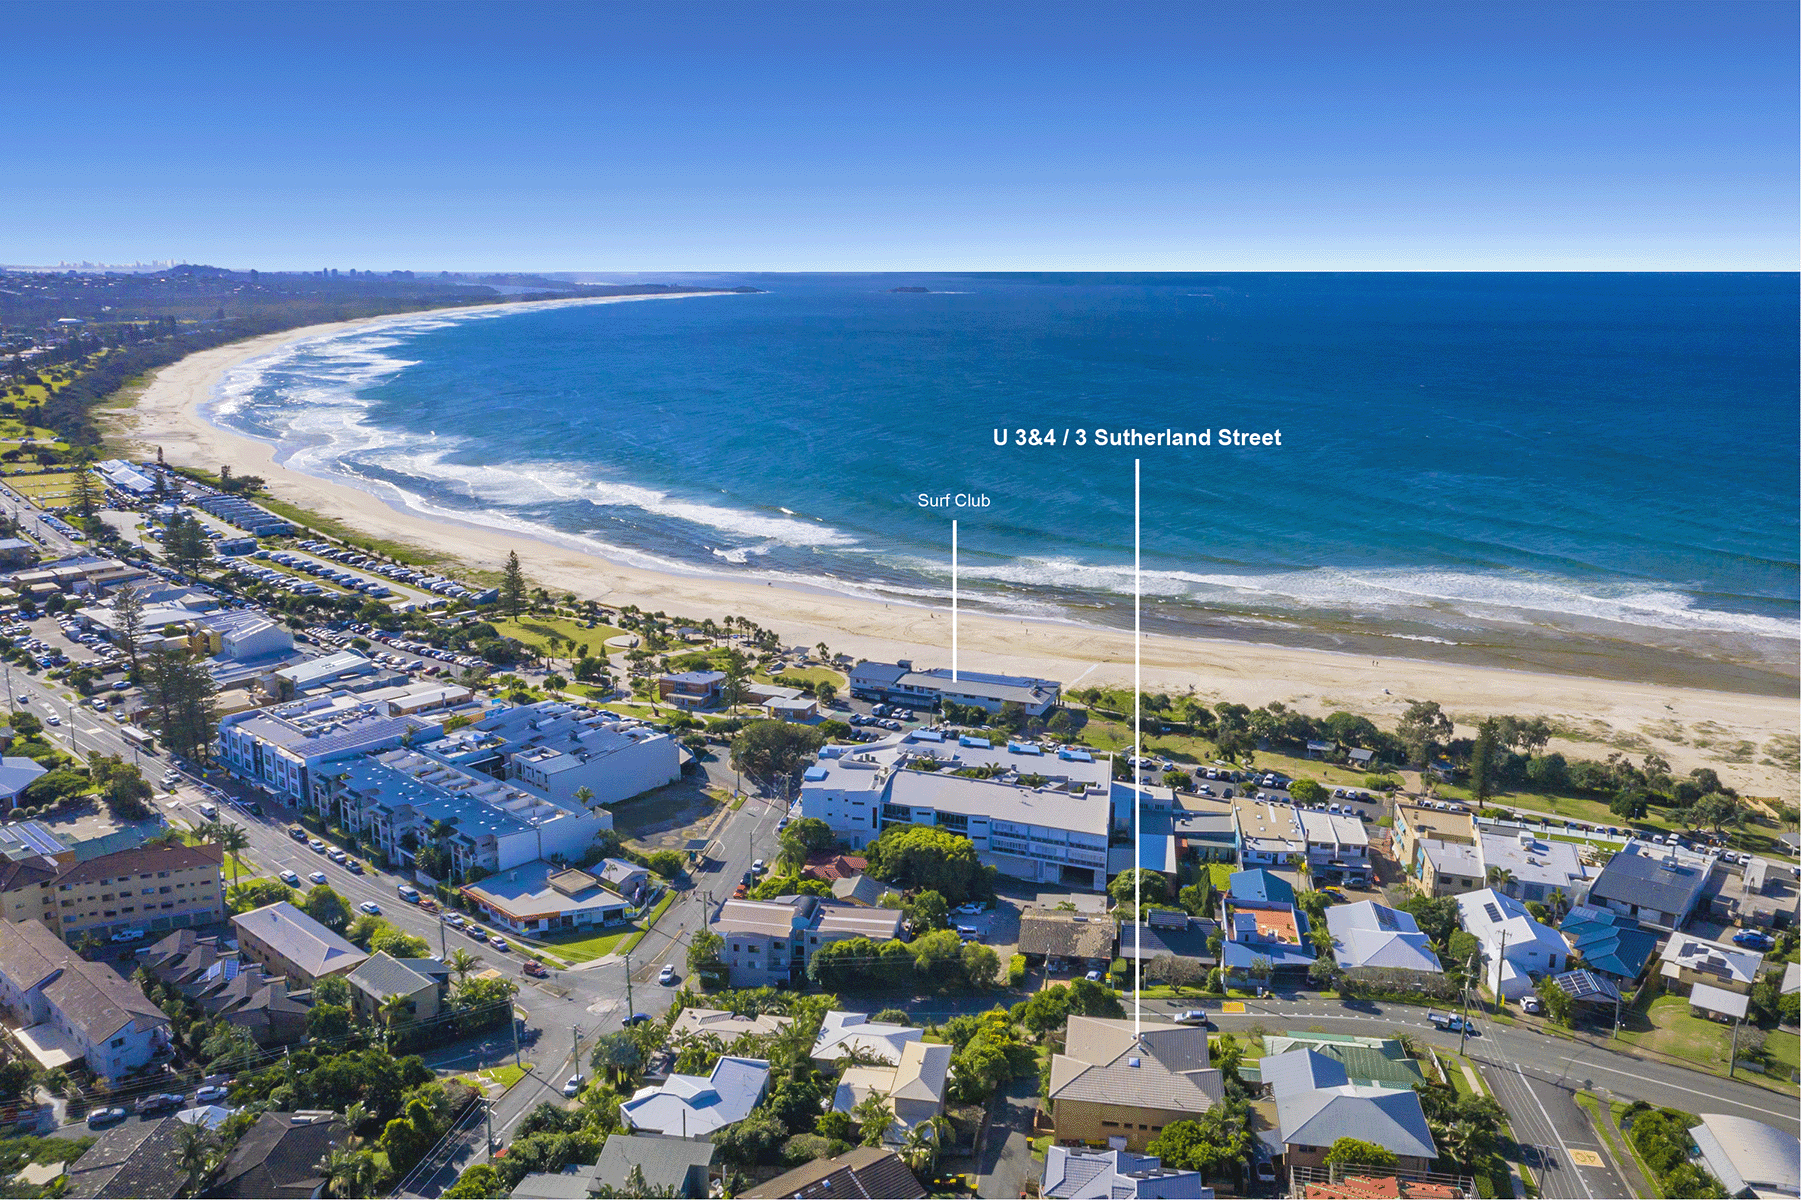 Aerial ohoto of Kingscliff with Seagaze apartments marked as two blocks from the beach